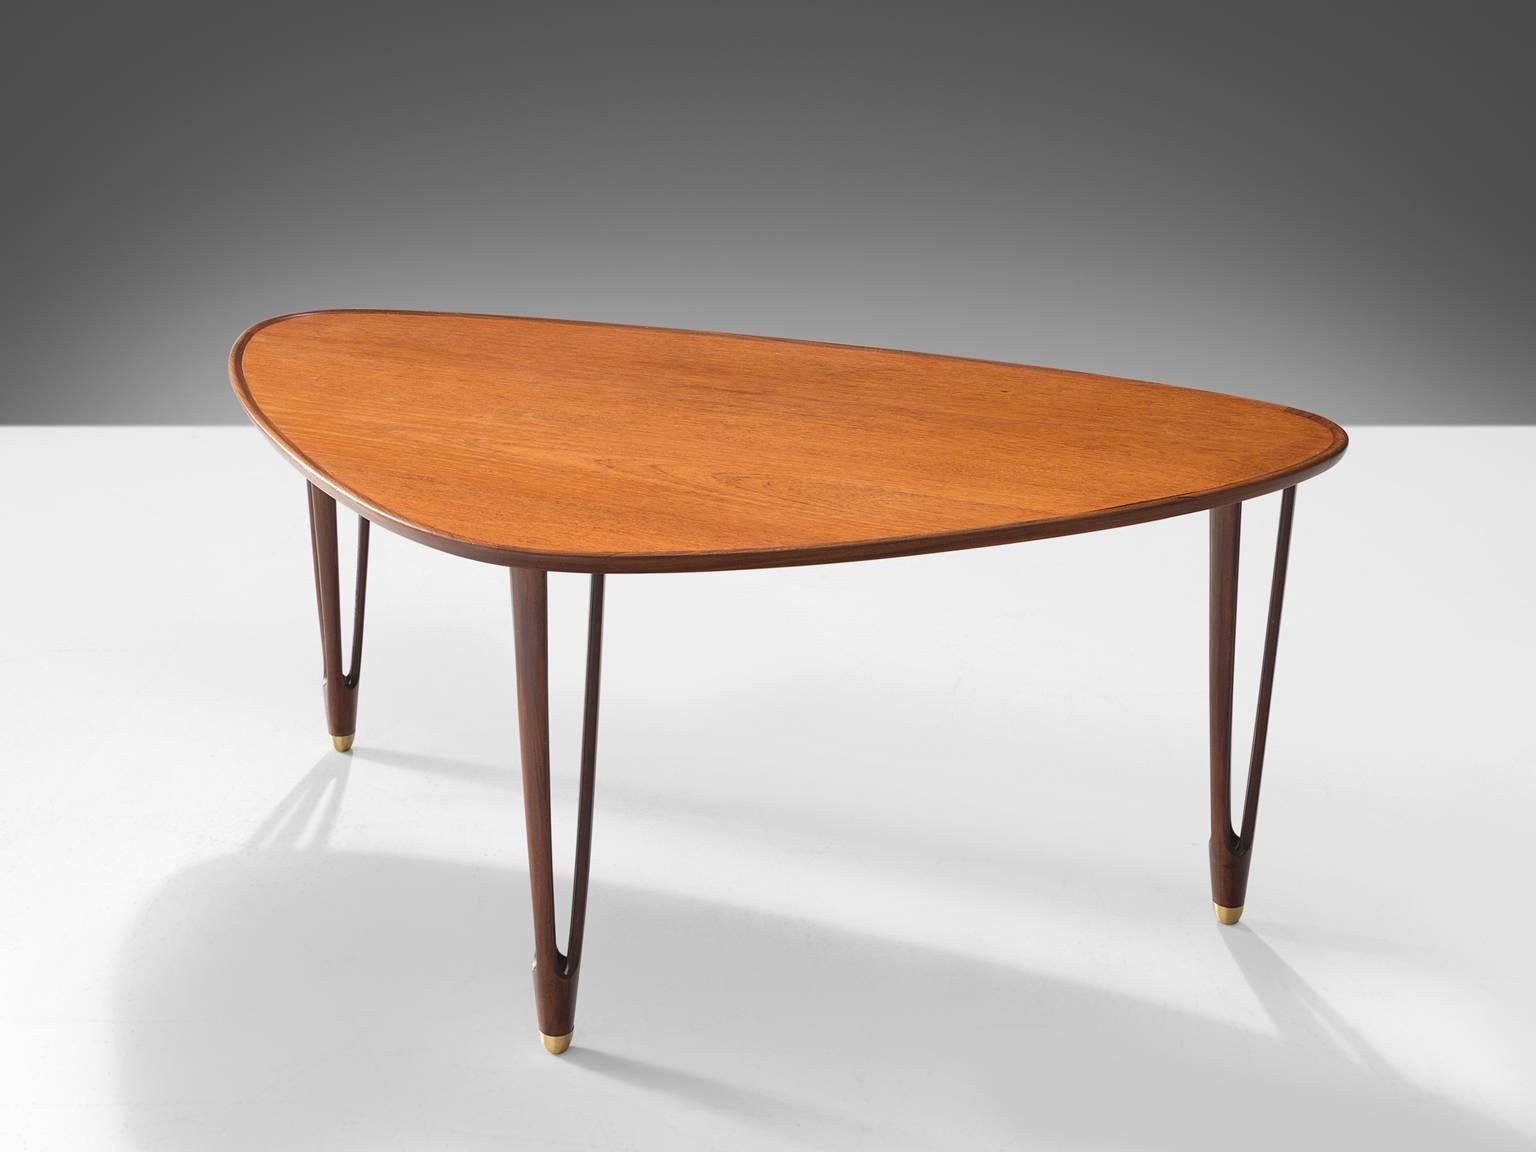 Coffee table, teak, brass, Denmark, 1950s. 

This graceful asymmetrical tripod coffee table made from teak with rounded edges and brass feet is produced in the 1950s. The side table is exemplary for Scandinavian mid-modern design. The quality of